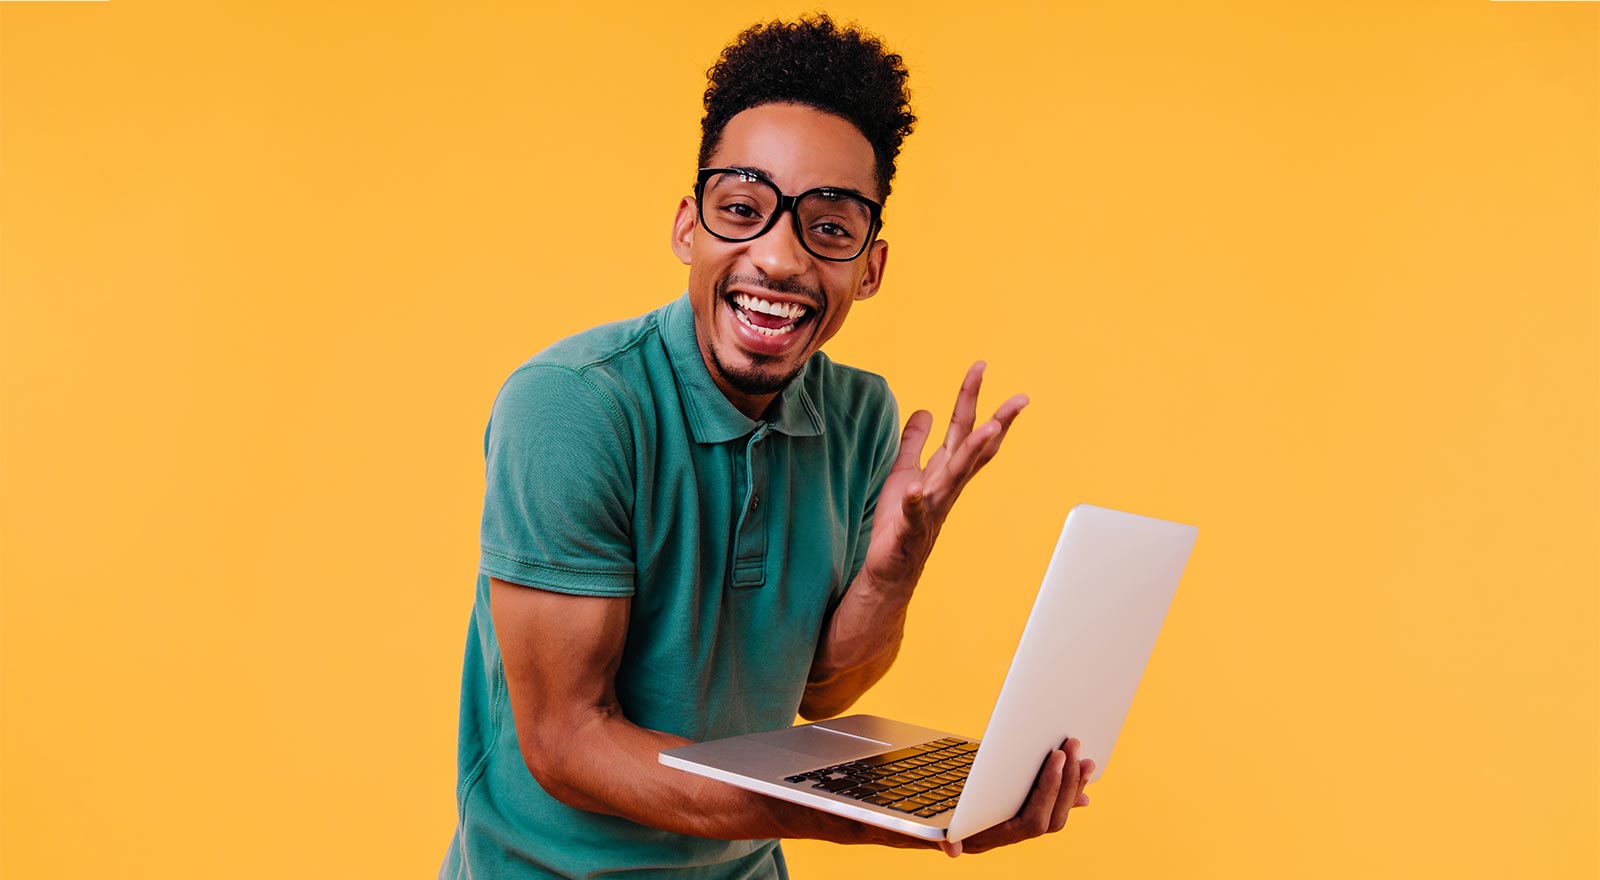 A happy man with glasses, holding a computer